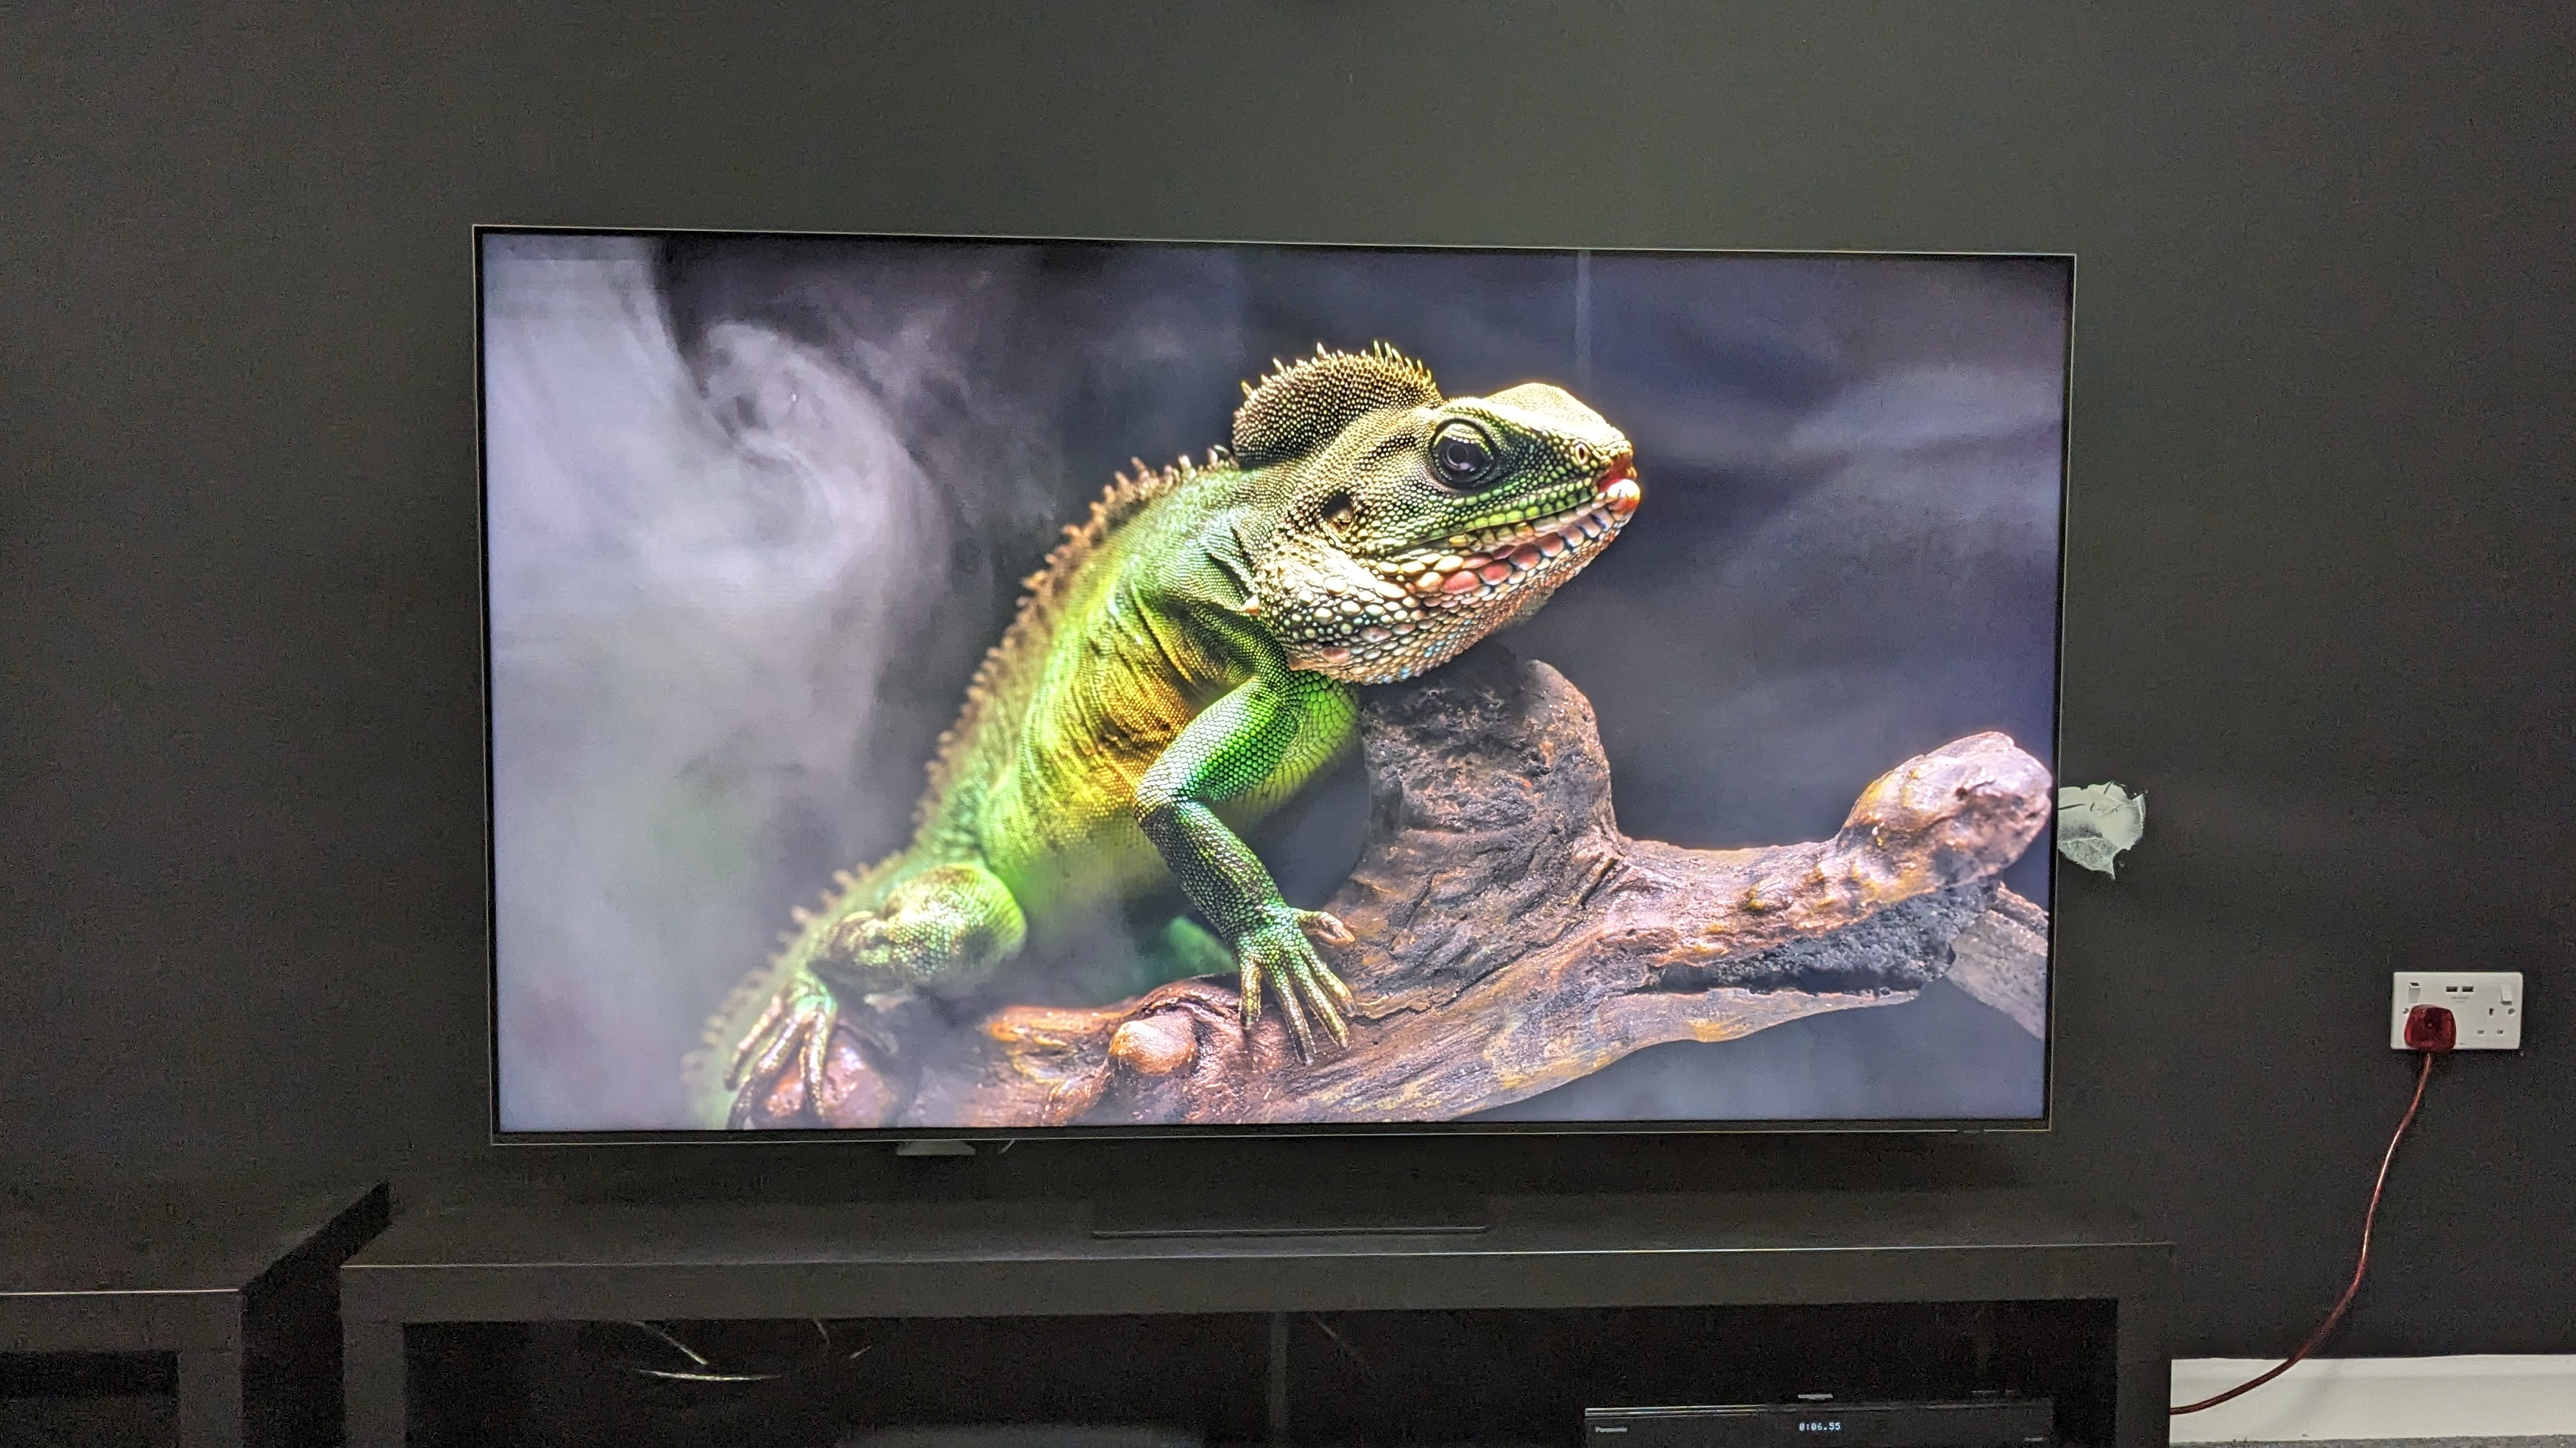 Samsung QN800D with reptile on screen